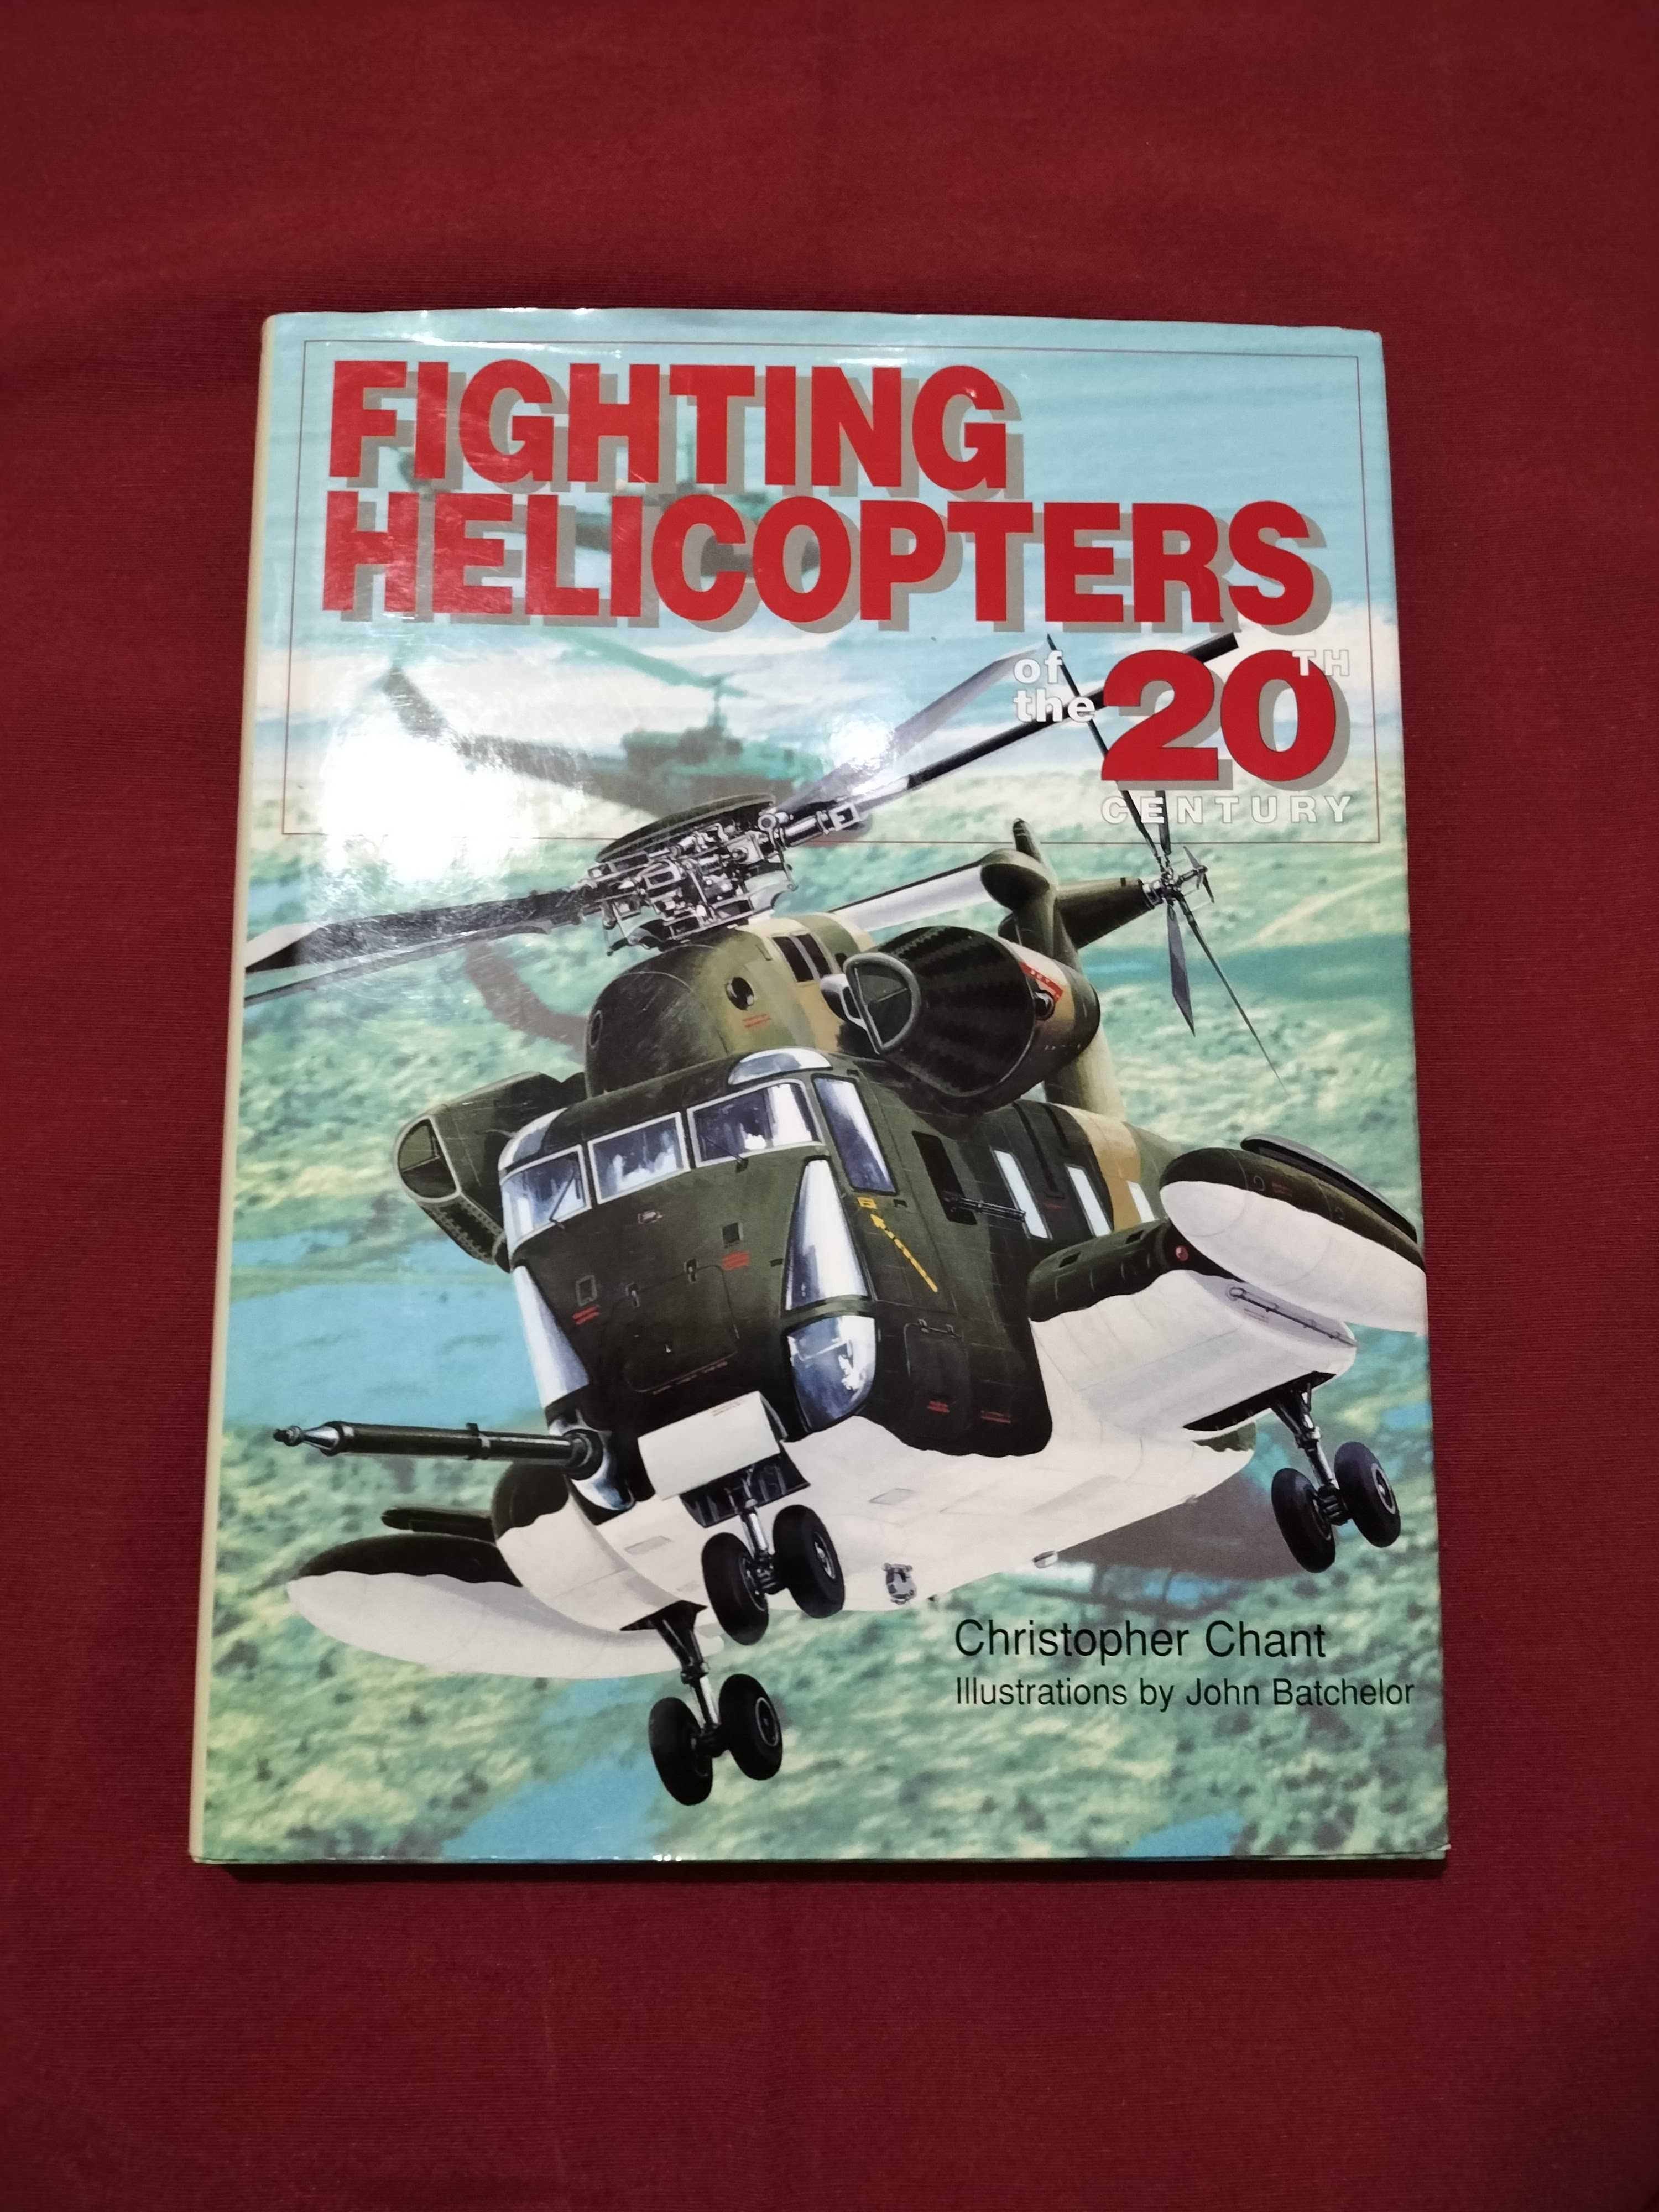 Livro "Fighting Helicopters Of The 20th Century"